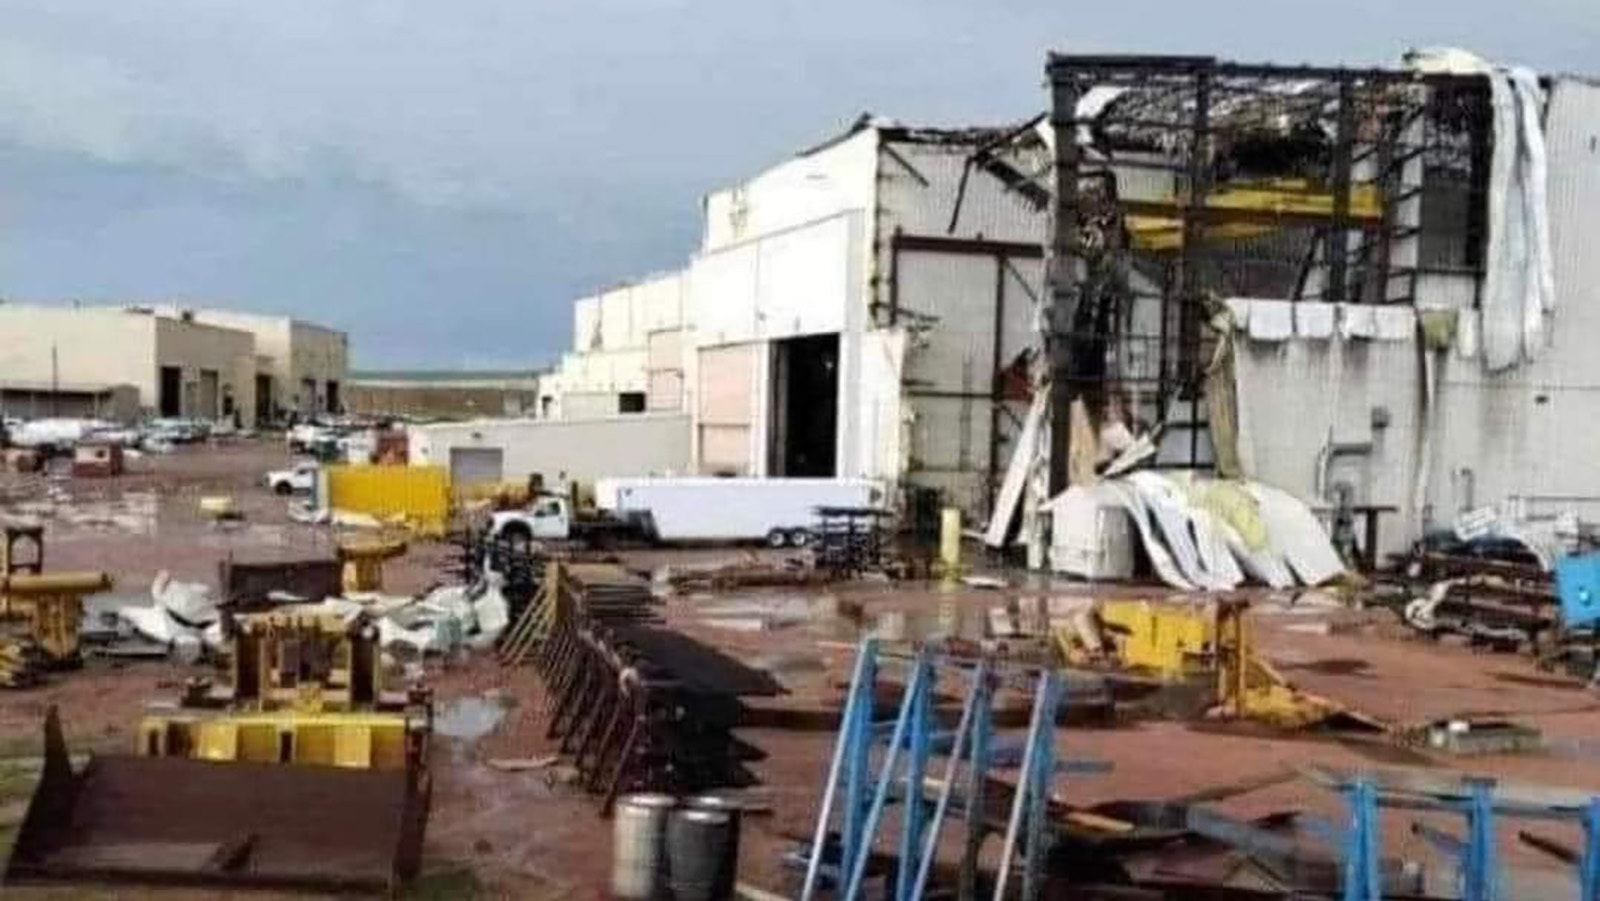 Images showing the aftermath of Friday evening's tornado at the North Antelope Rochelle coal mine are being shared widely on Facebook.